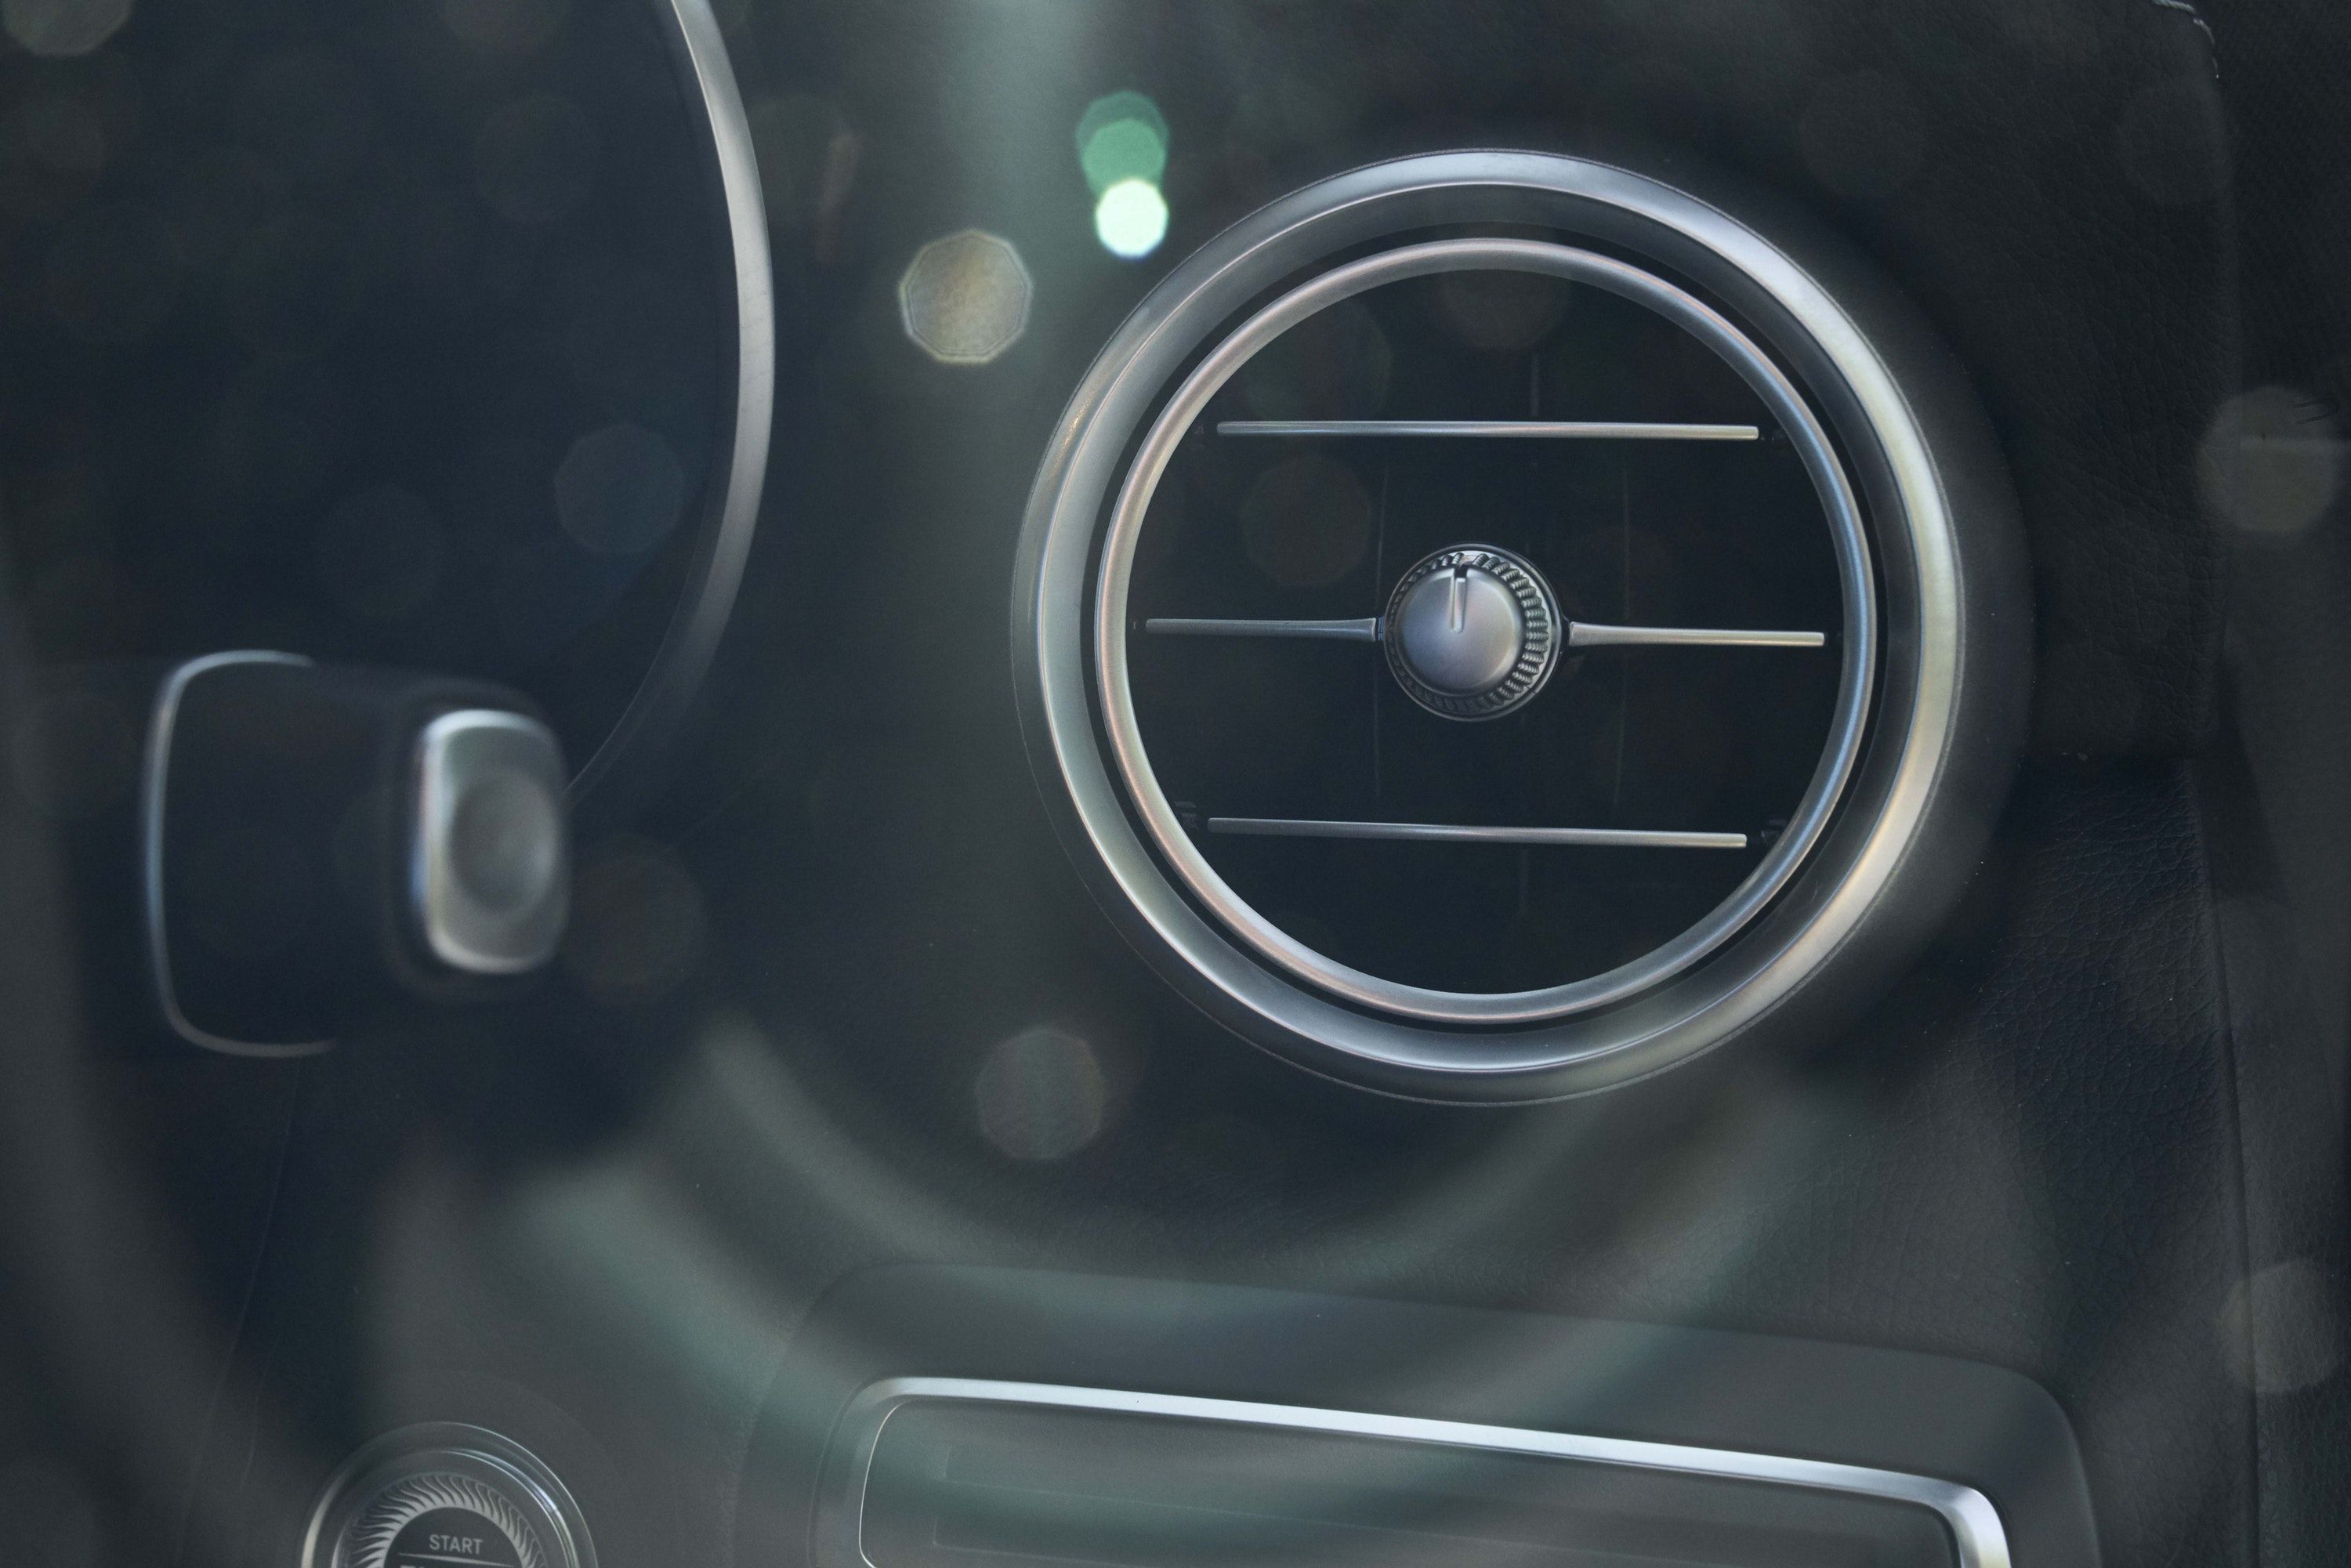 Close up of Air vents inside the Mercedes-Benz C-Class